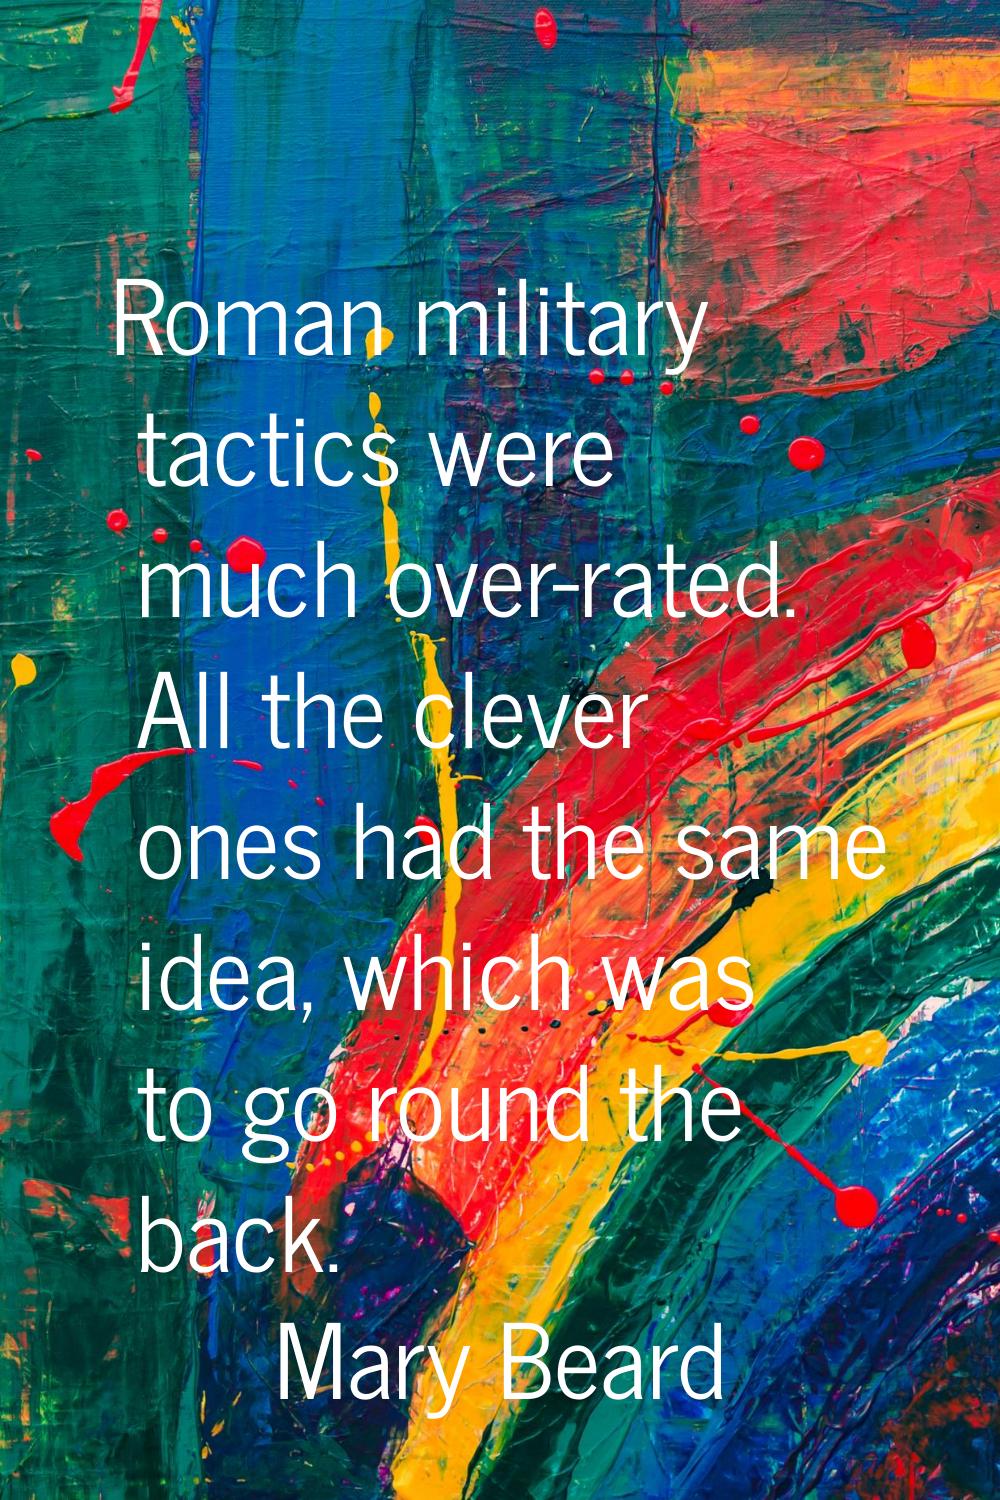 Roman military tactics were much over-rated. All the clever ones had the same idea, which was to go